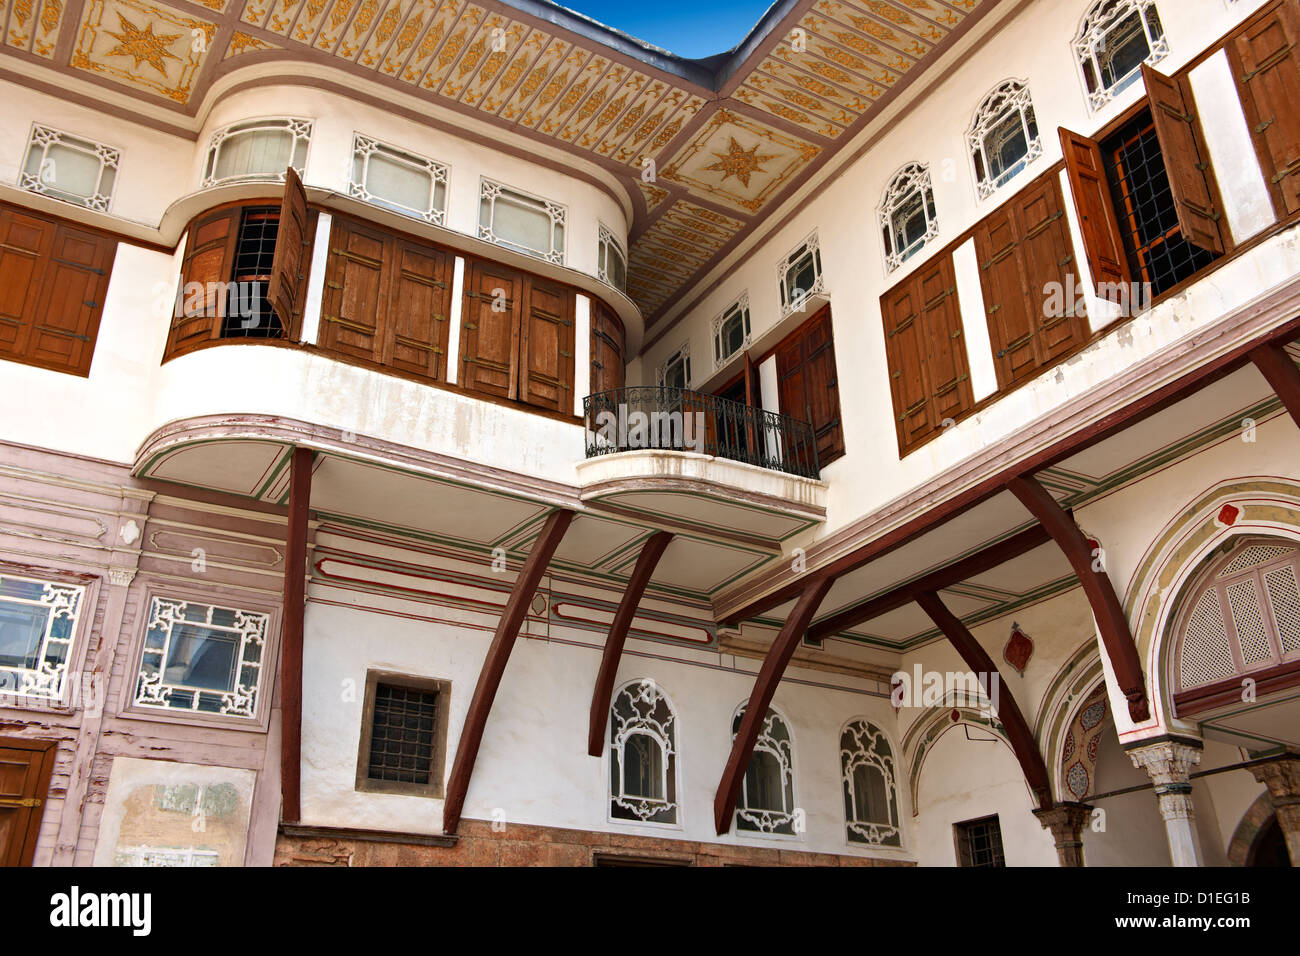 The Courtyard of the Favourites  where Sultan Abül Hamid I lived with the Favourite Consort of his harem Topkapi Palace Istanbul Stock Photo